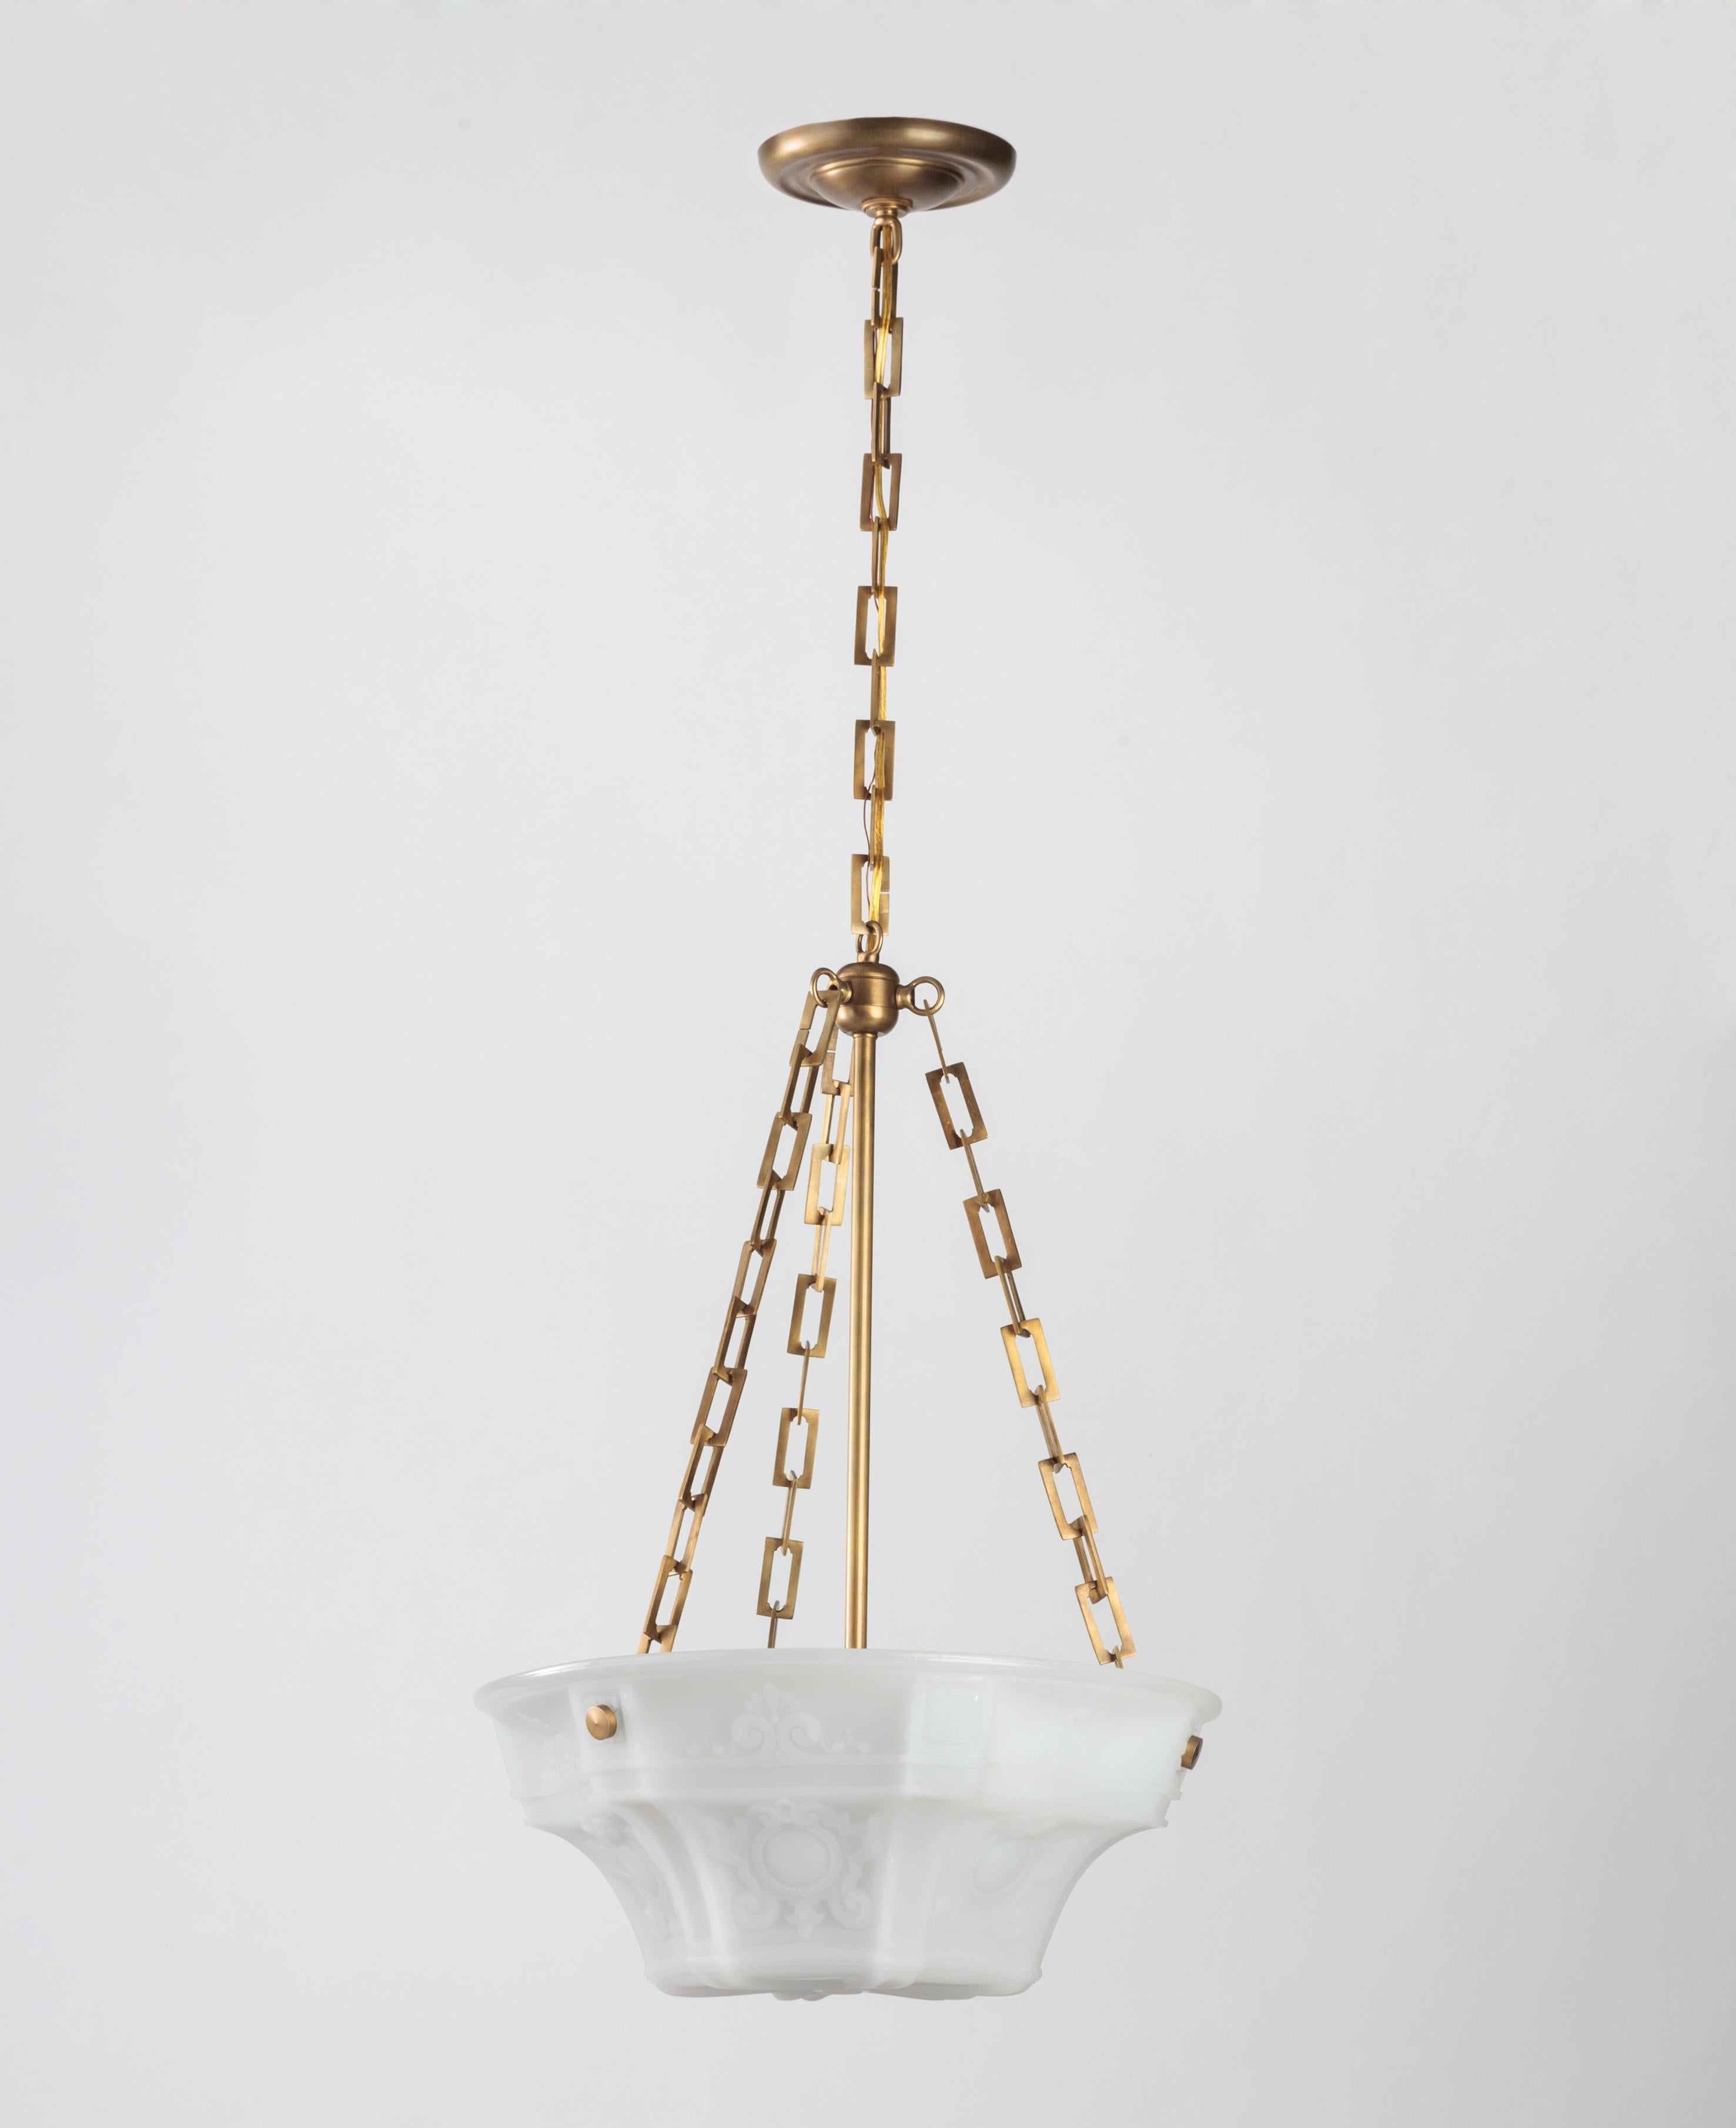 AHL3778

An antique cast opaline inverted dome chandelier suspended on brass fittings. Due to the antique nature of this fixture, there may be some nicks or imperfections in the glass, circa 1910

Dimensions:
Current height 42-1/2